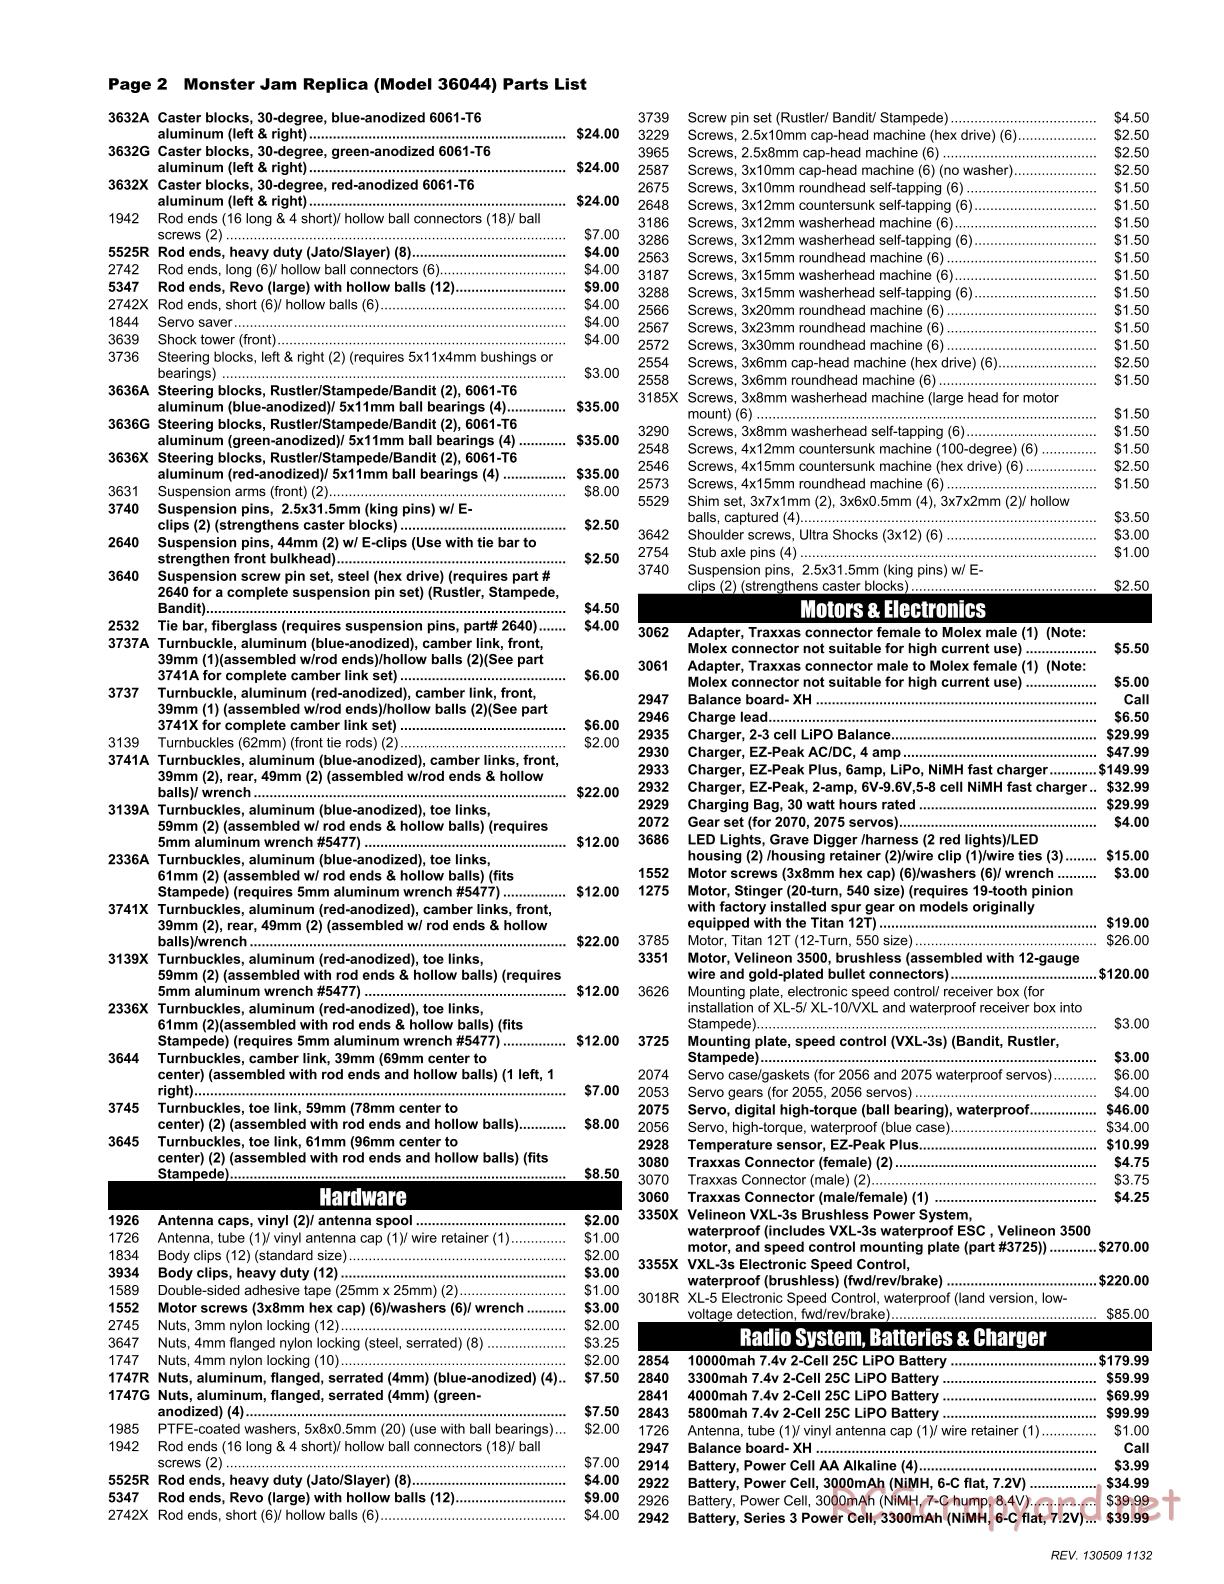 Traxxas - Monster Jam - Son-Uva Digger - Parts List - Page 2